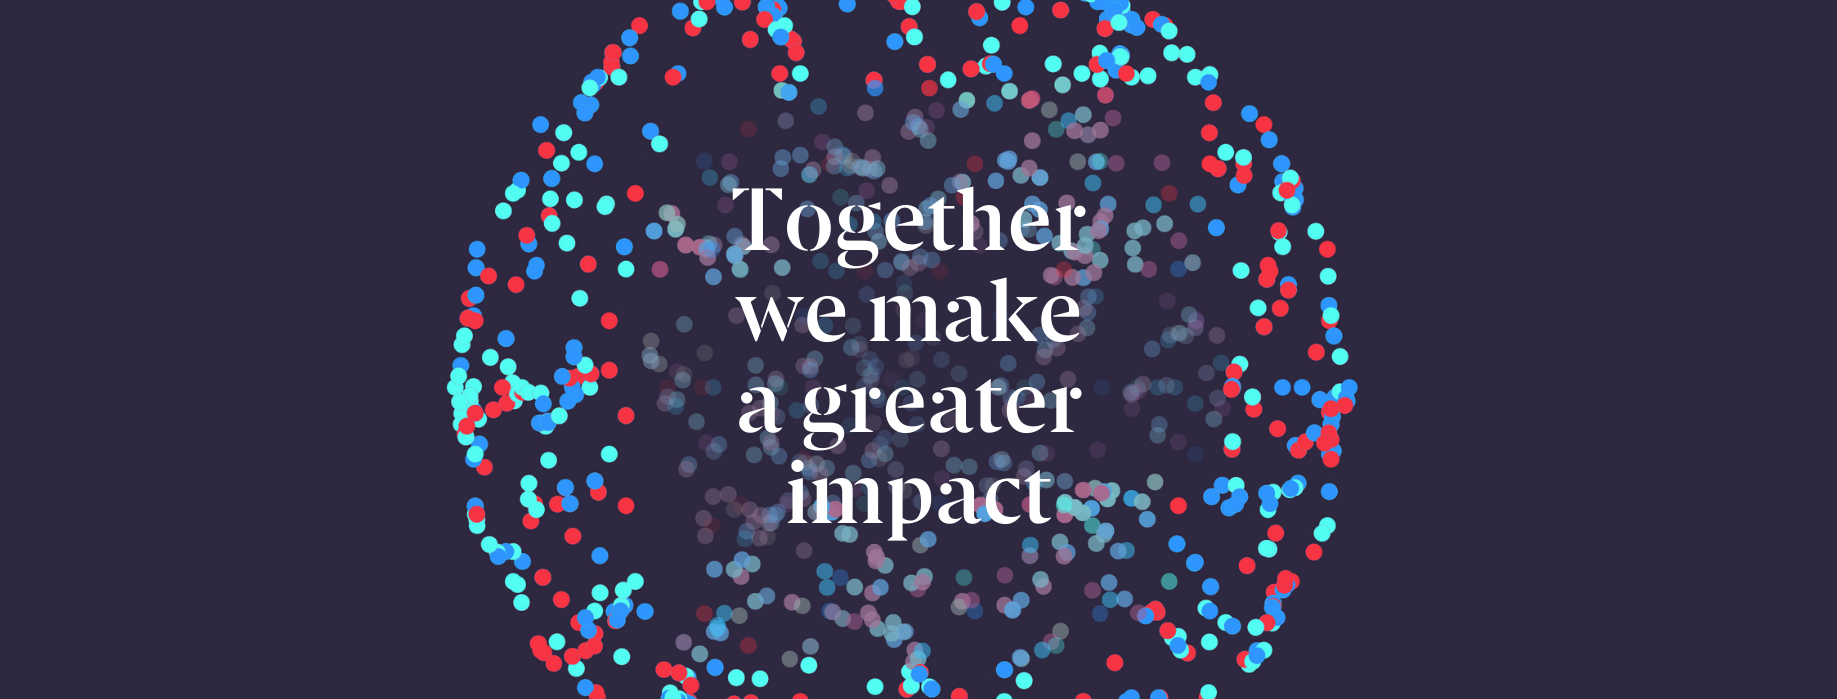 Together we make a greater impact